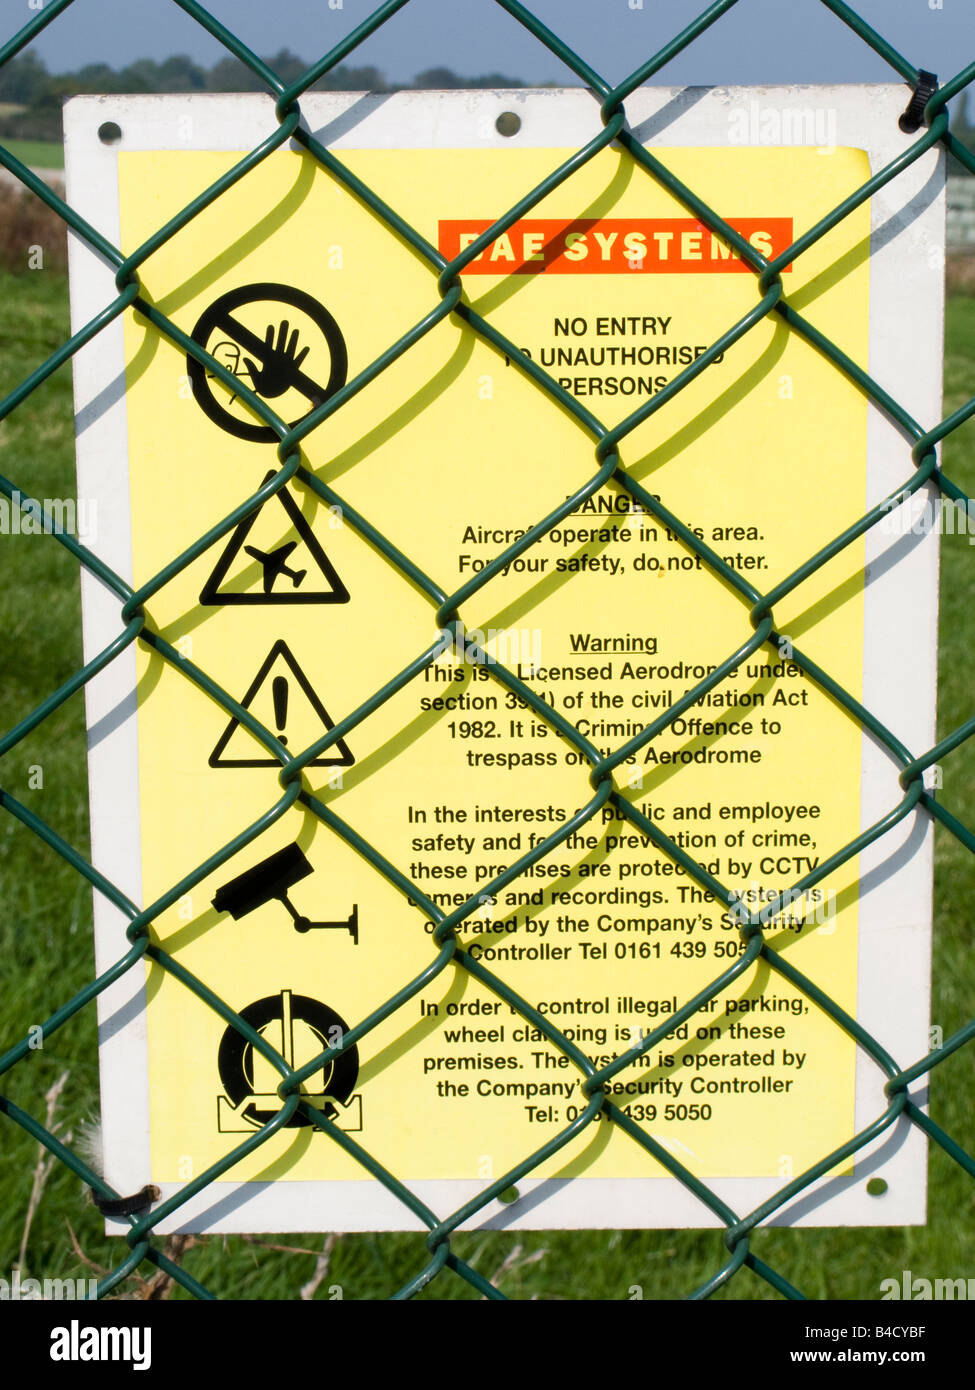 Defence Woodford security warning notice on BAe Systems Airfield perimeter fence Stock Photo